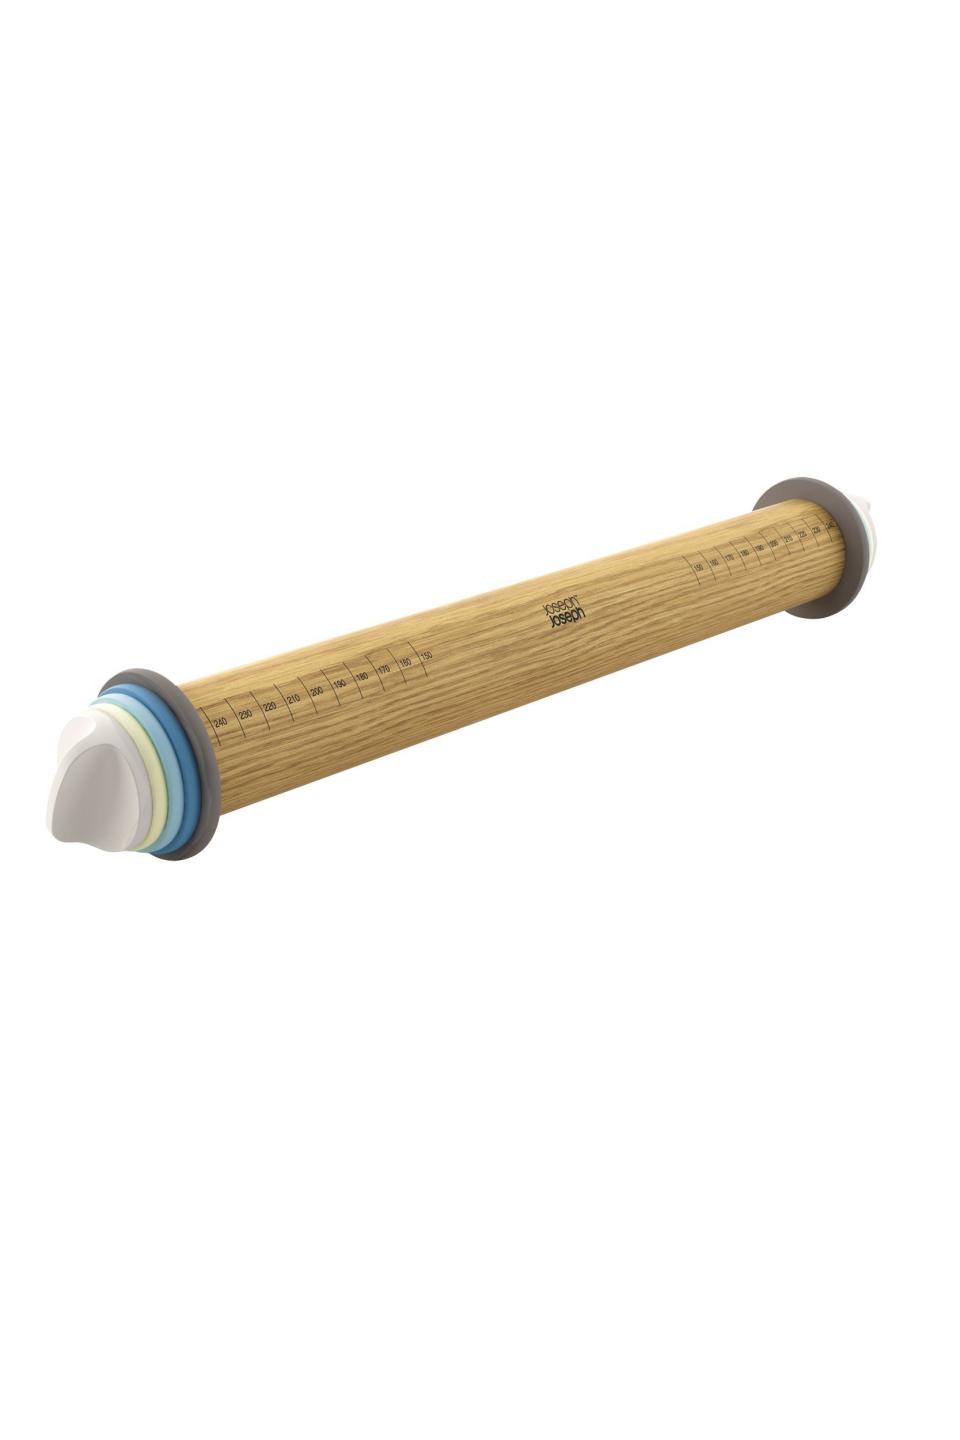 48) Adjustable Rolling Pin